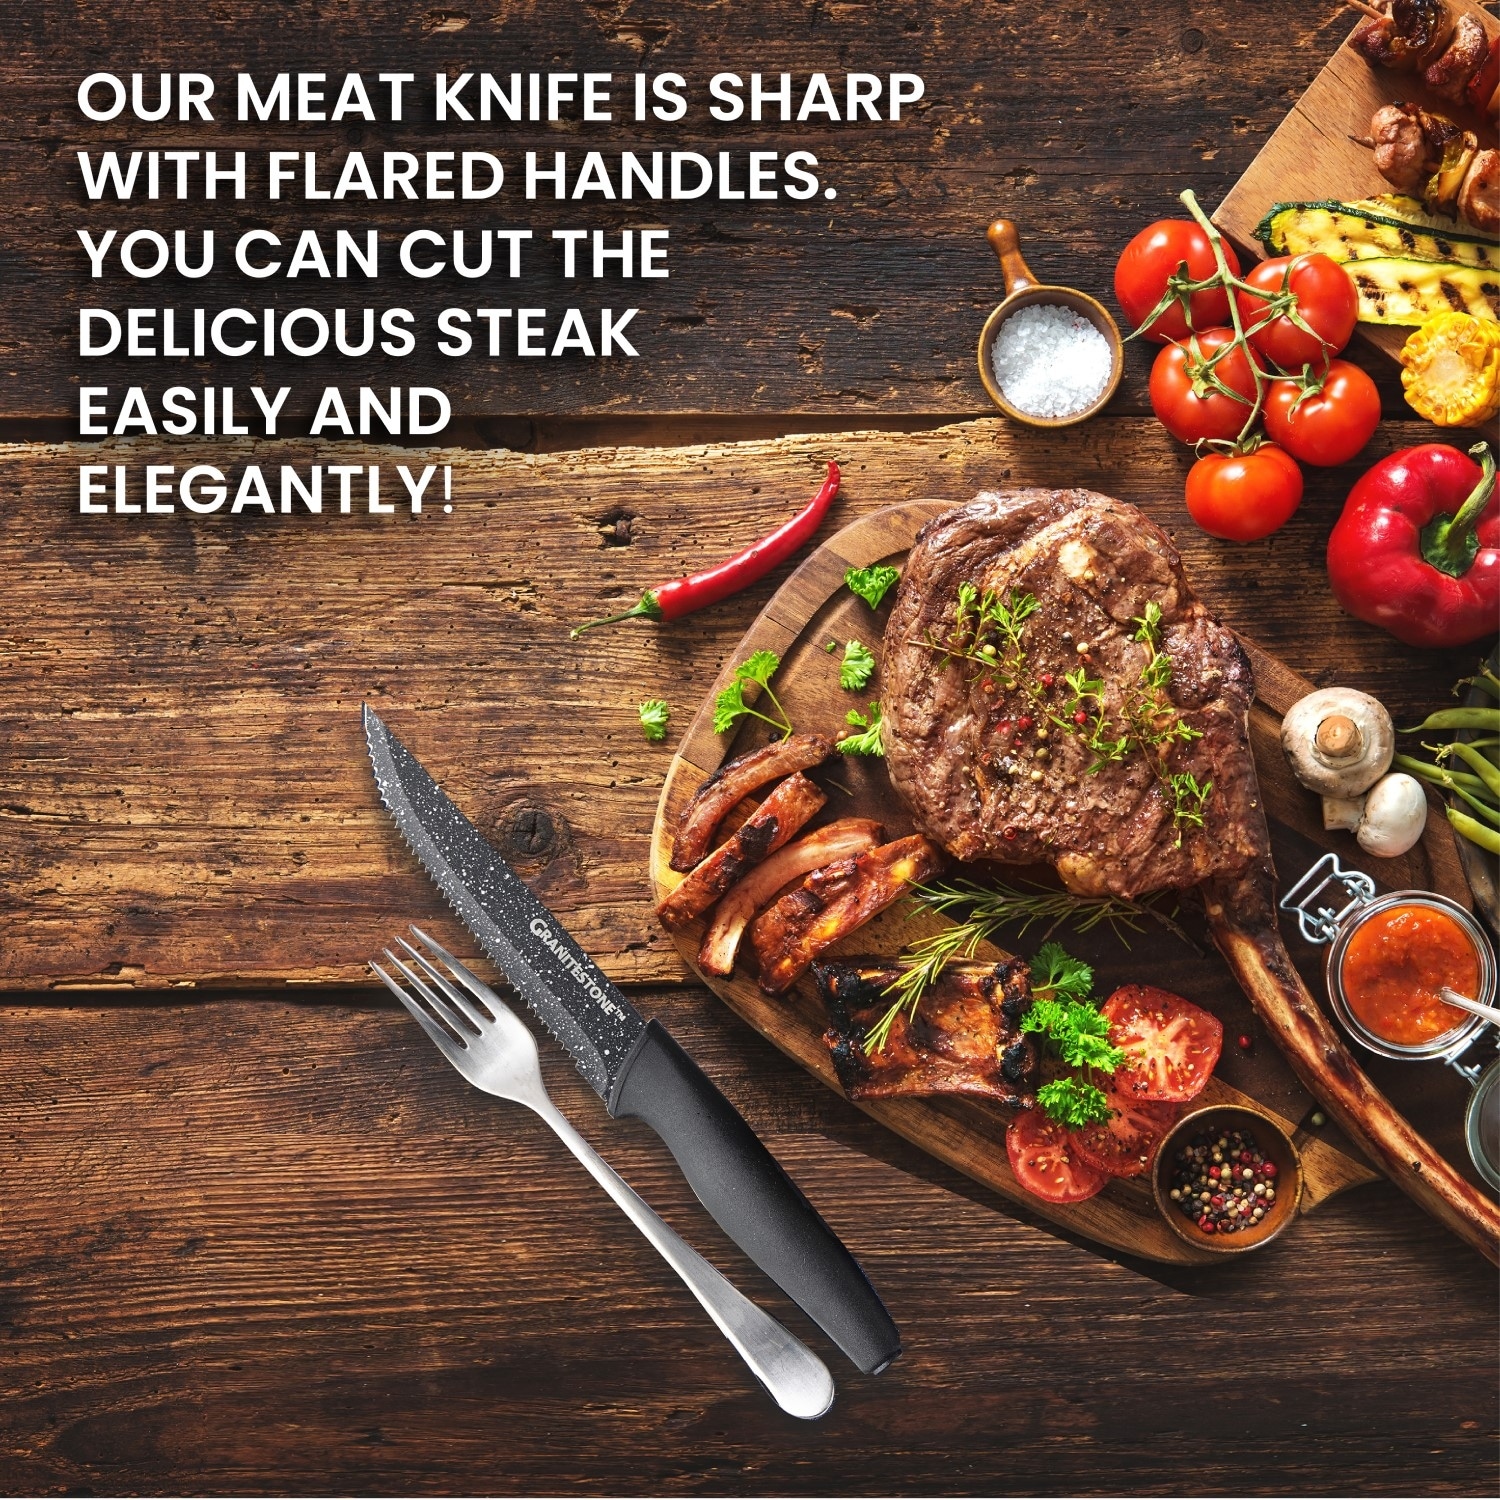 https://ak1.ostkcdn.com/images/products/is/images/direct/227fc6993930b3f3d5a7a1d5c9763d2afe2658bb/Granitestone-NutriBlade-6-Piece-Black-Steak-Knives-with-Easy-Grip-Handle..jpg